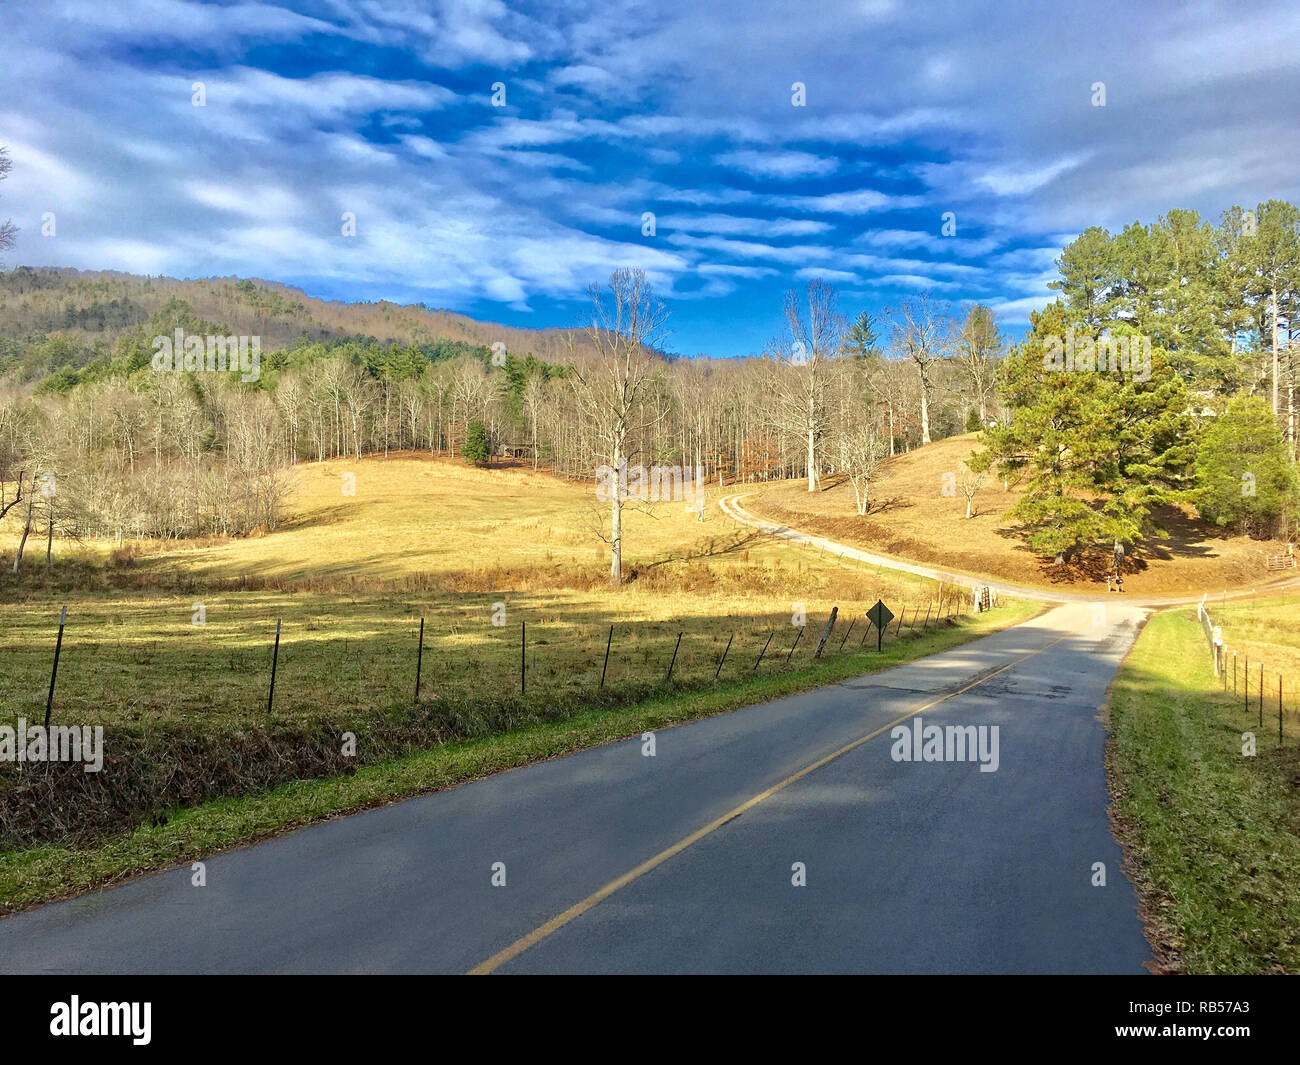 Scenic rural road with pasture, mountains, and clouds, on a peaceful winter morning. Shadows give it a secluded feeling. Stock Photo